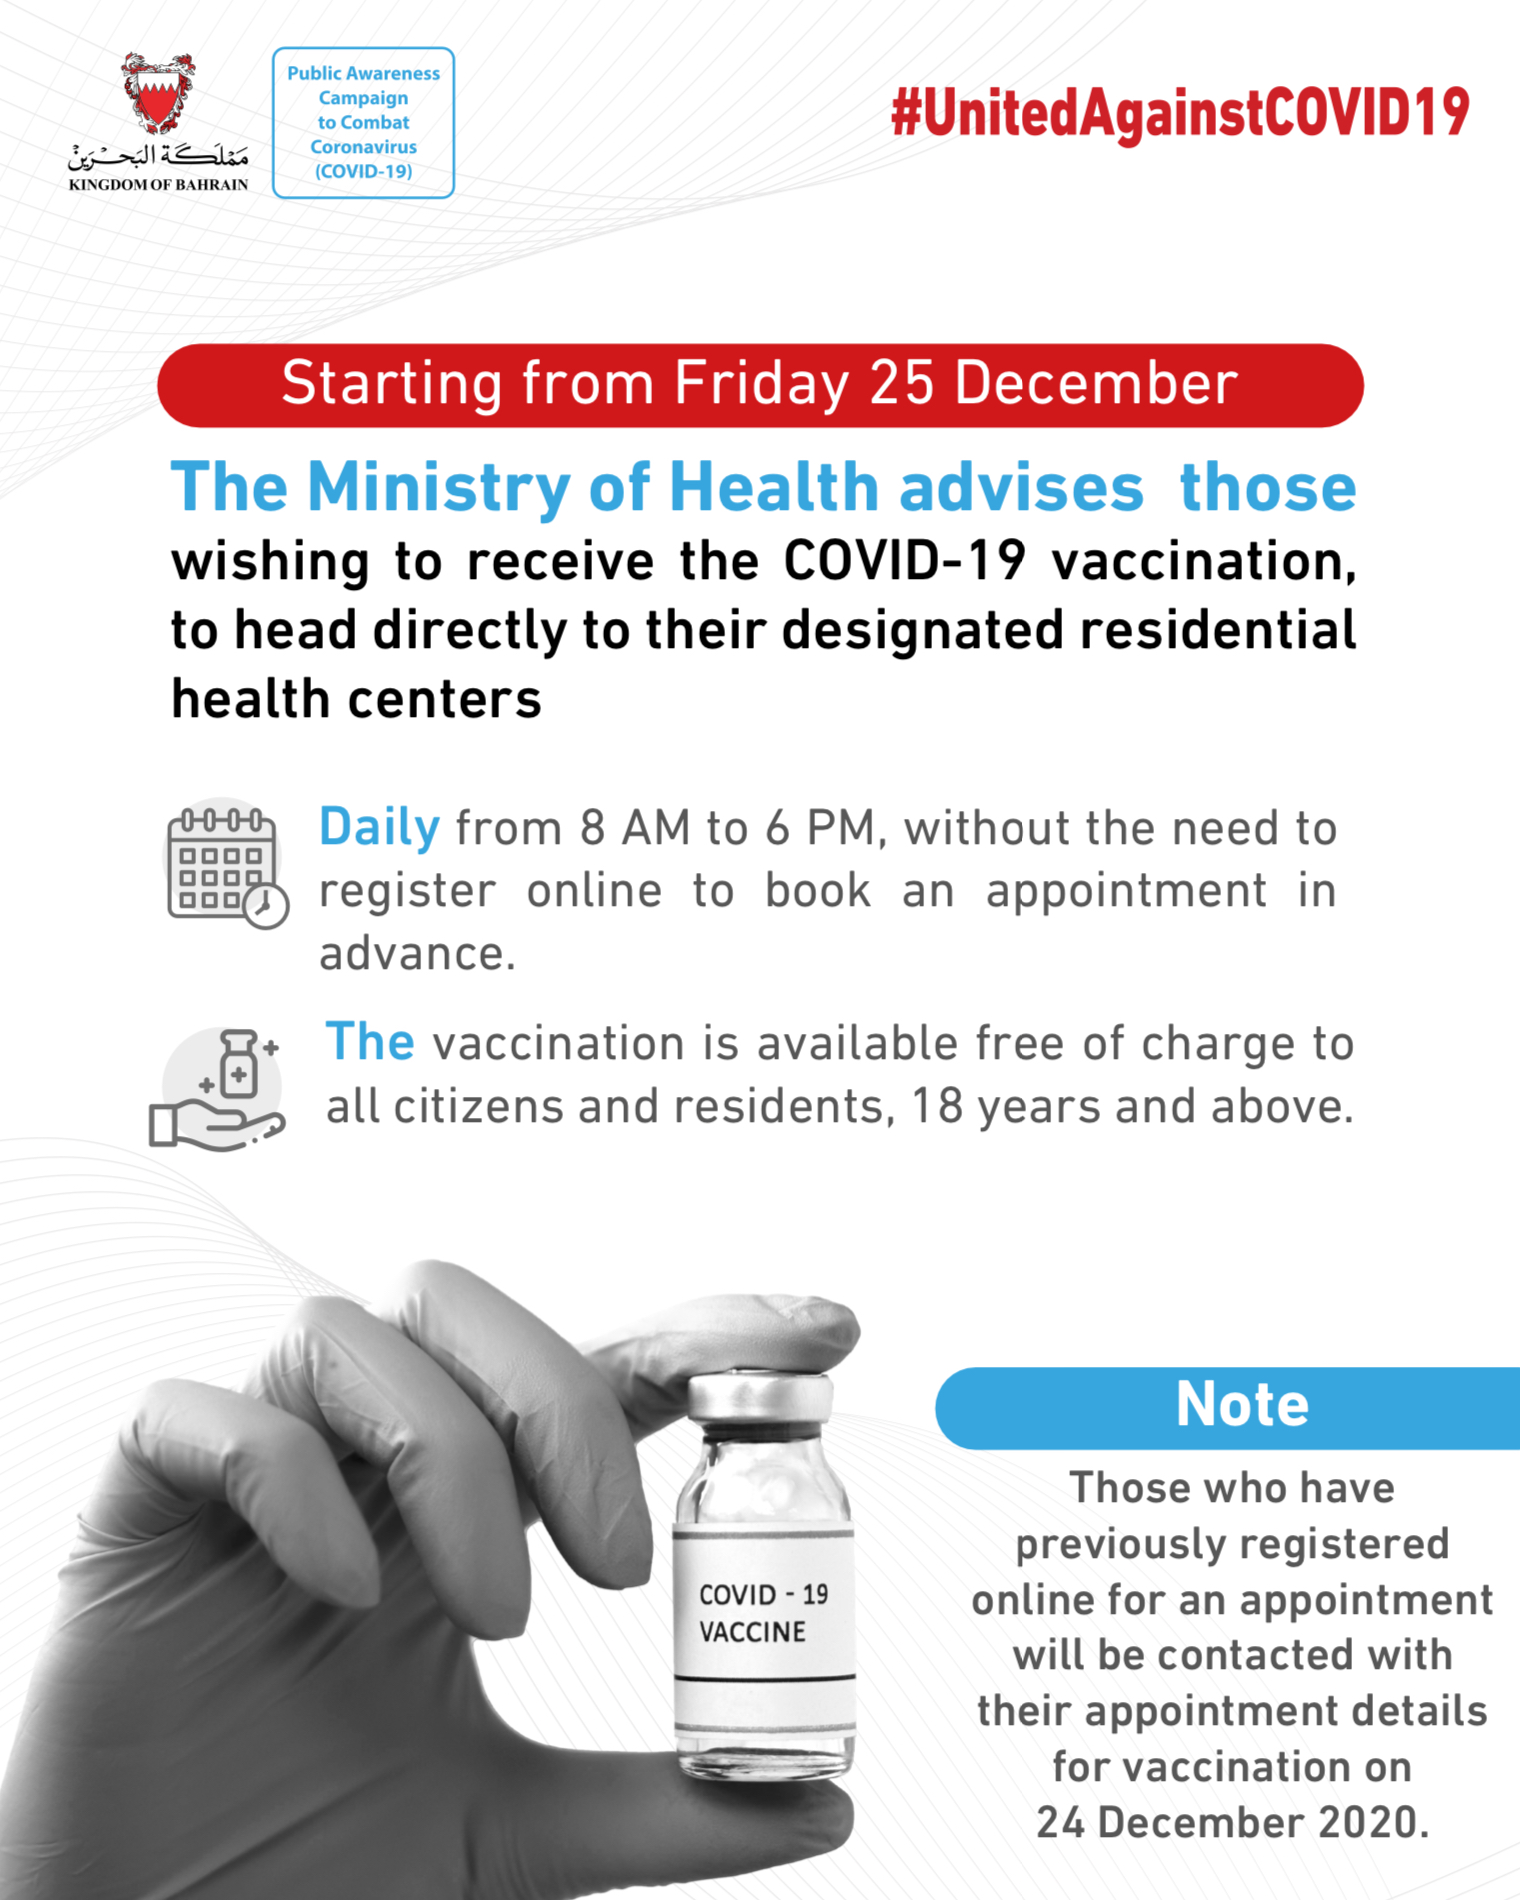 MOH advises citizens and residents to head directly to designated residential health centers to receive COVID-19 vaccine